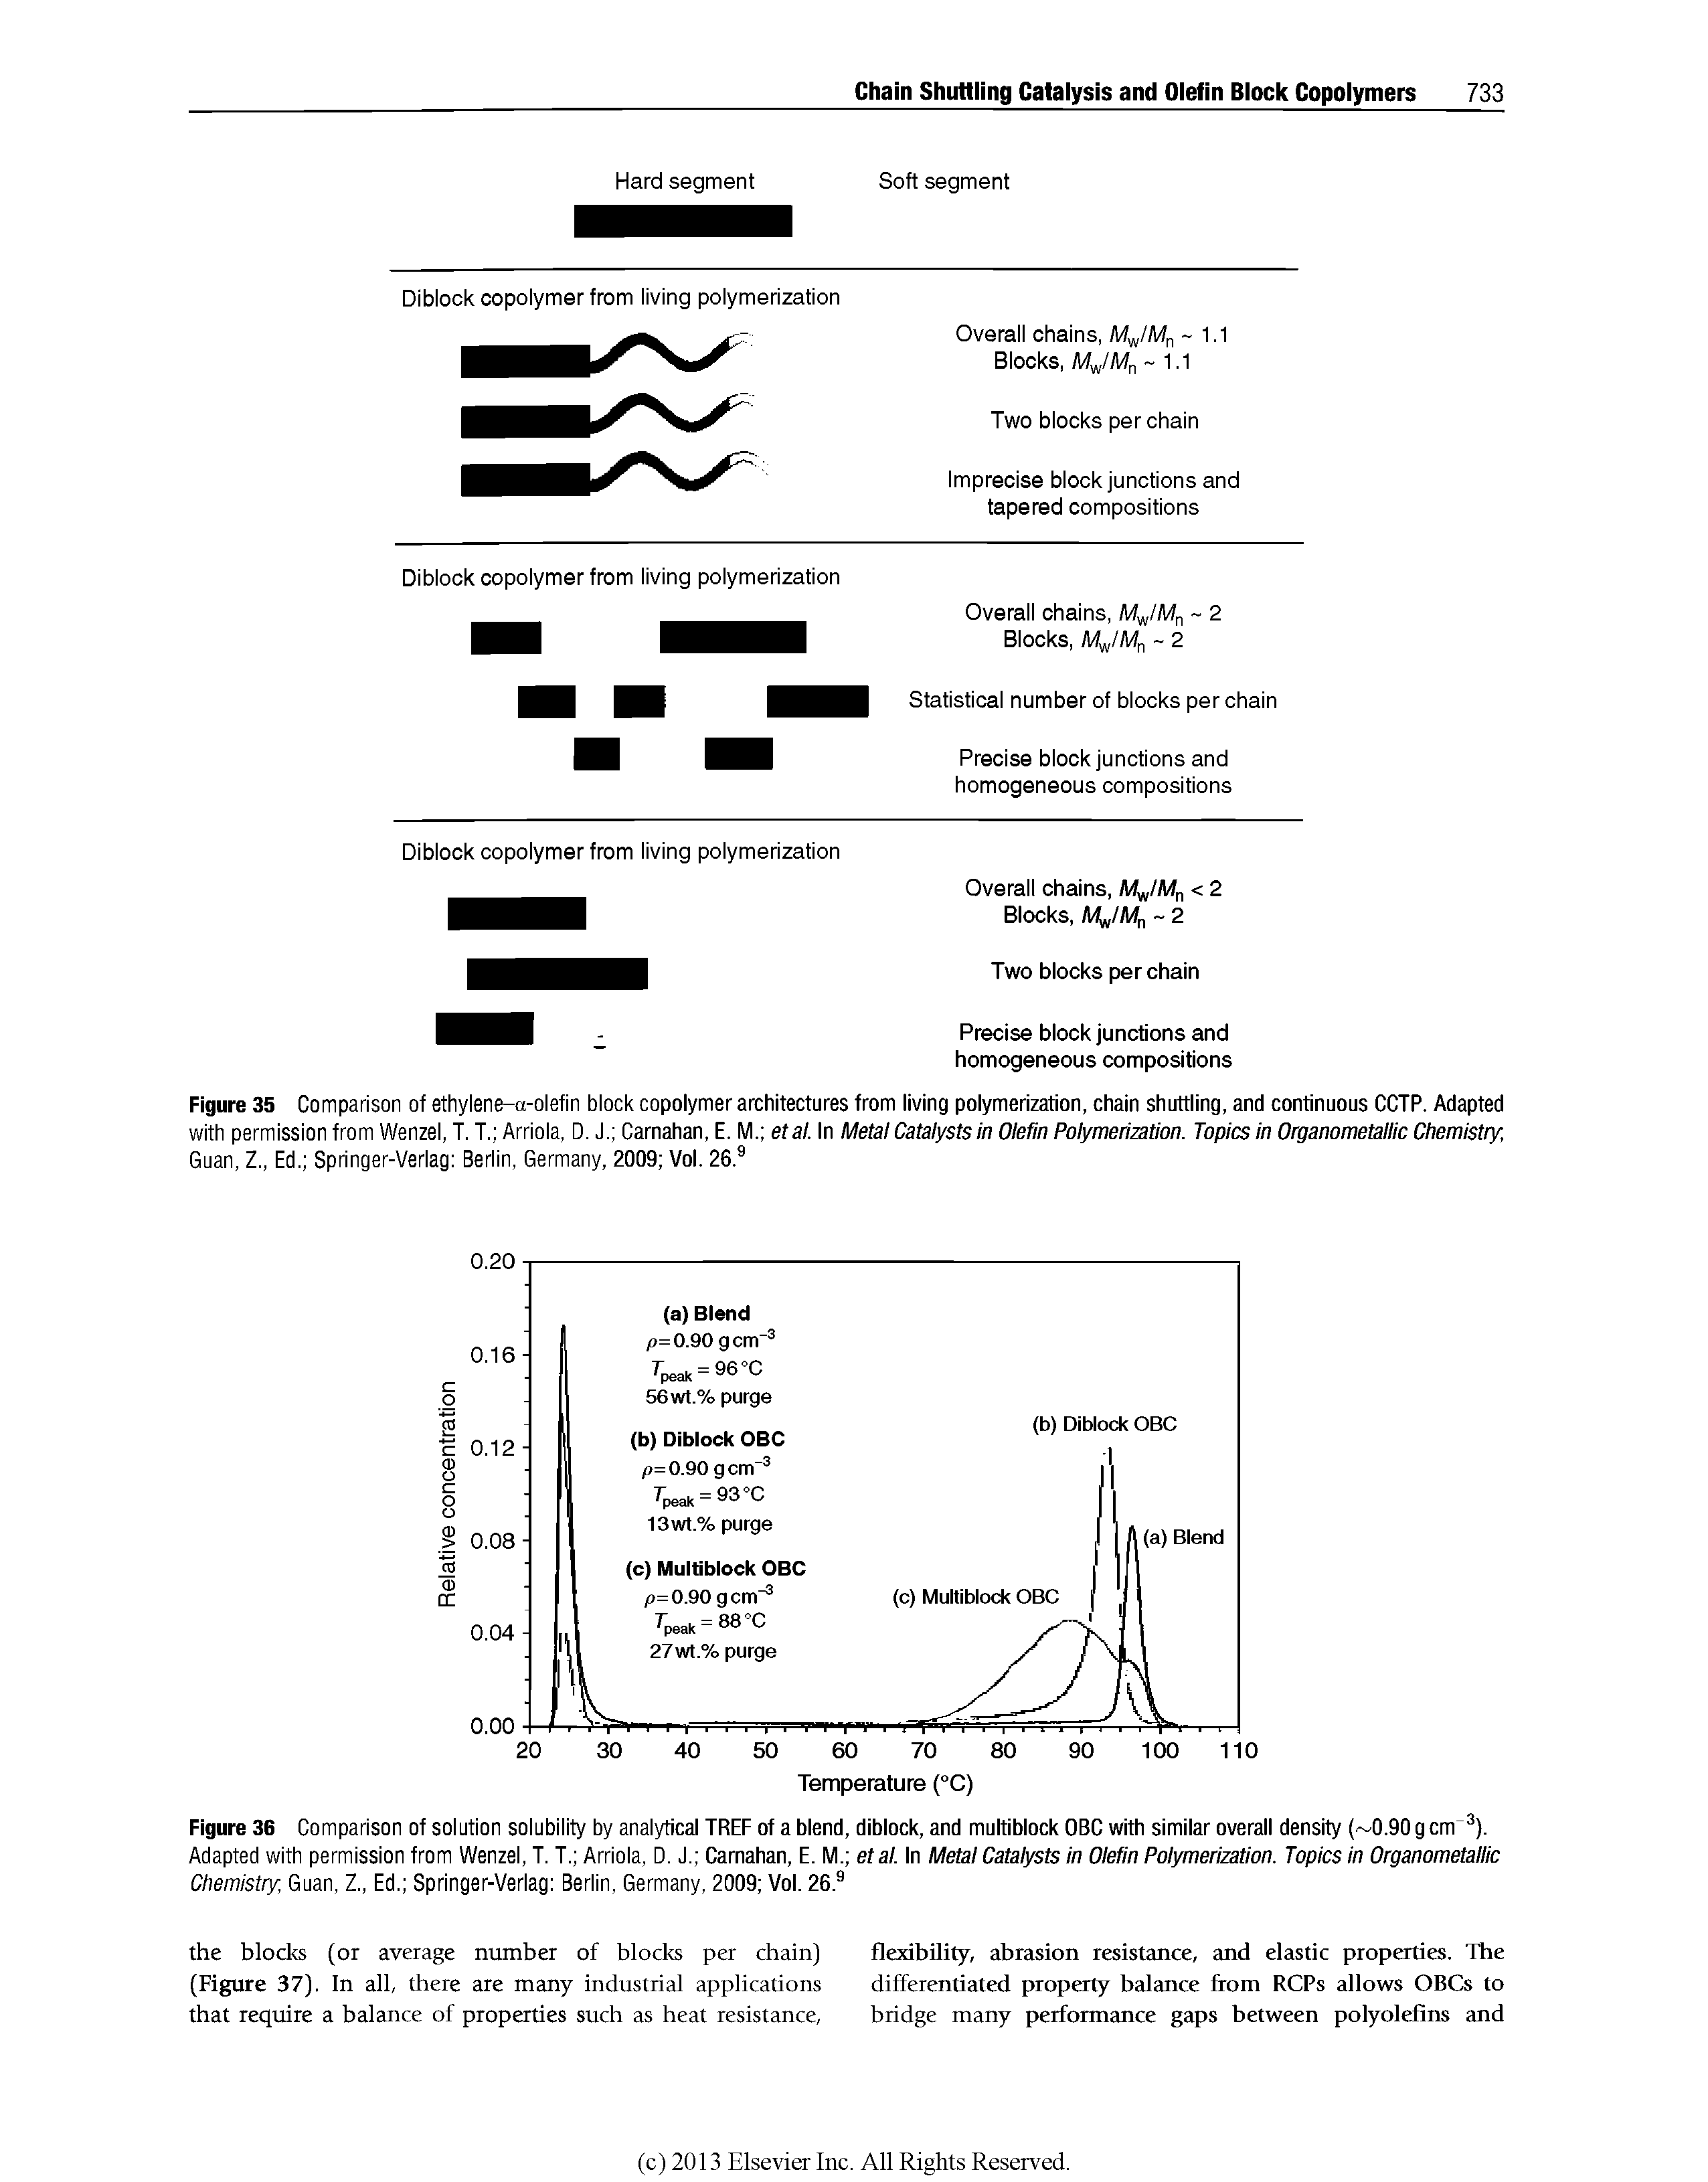 Figure 36 Comparison of solution solubility by analytical TREF of a blend, diblock, and multiblock OBC with similar overall density ( 0.90 g cm ). Adapted with permission from Wenzel, T. T. Arriola, D. J. Carnahan, E. M. etai. In Meta/ Catalysts In Olefin Polymerization. Topics in Organometallic Chemistry, Guan, Z., Ed. Springer-Verlag Berlin, Germany, 2009 Vol. 26. ...